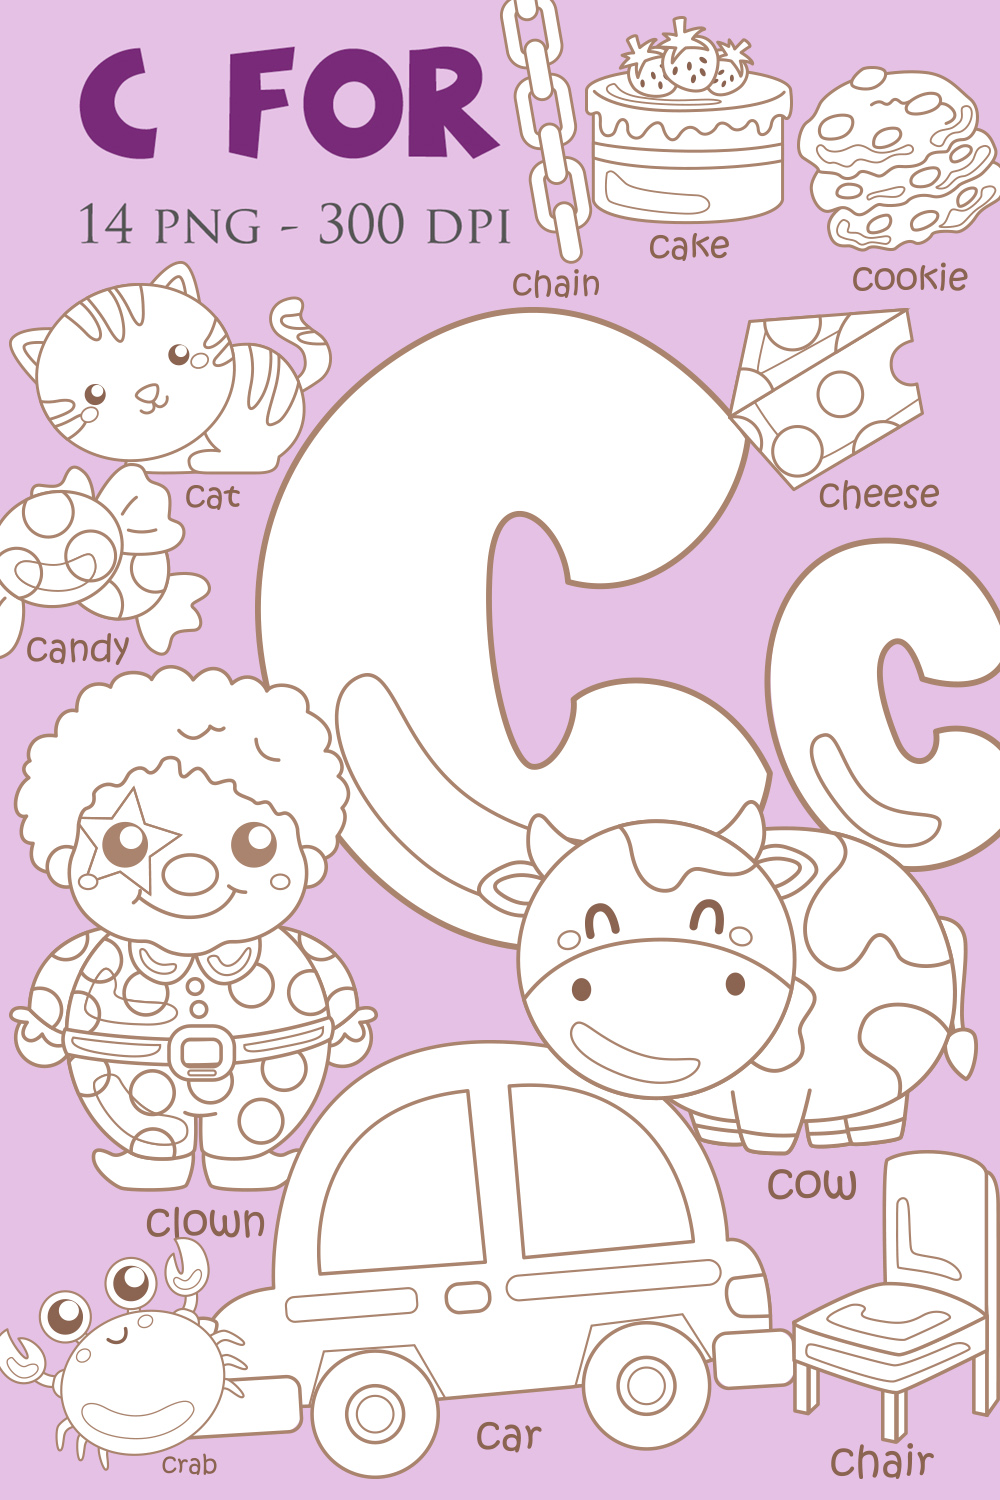 Alphabet C For Vocabulary School Letter Reading Writing Font Study Learning Student Toodler Kids Car Crab Cake Clown Cookie Cow Cactus Cheese Candy Chain Chair Cat Cartoon Digital Stamp Outline pinterest preview image.